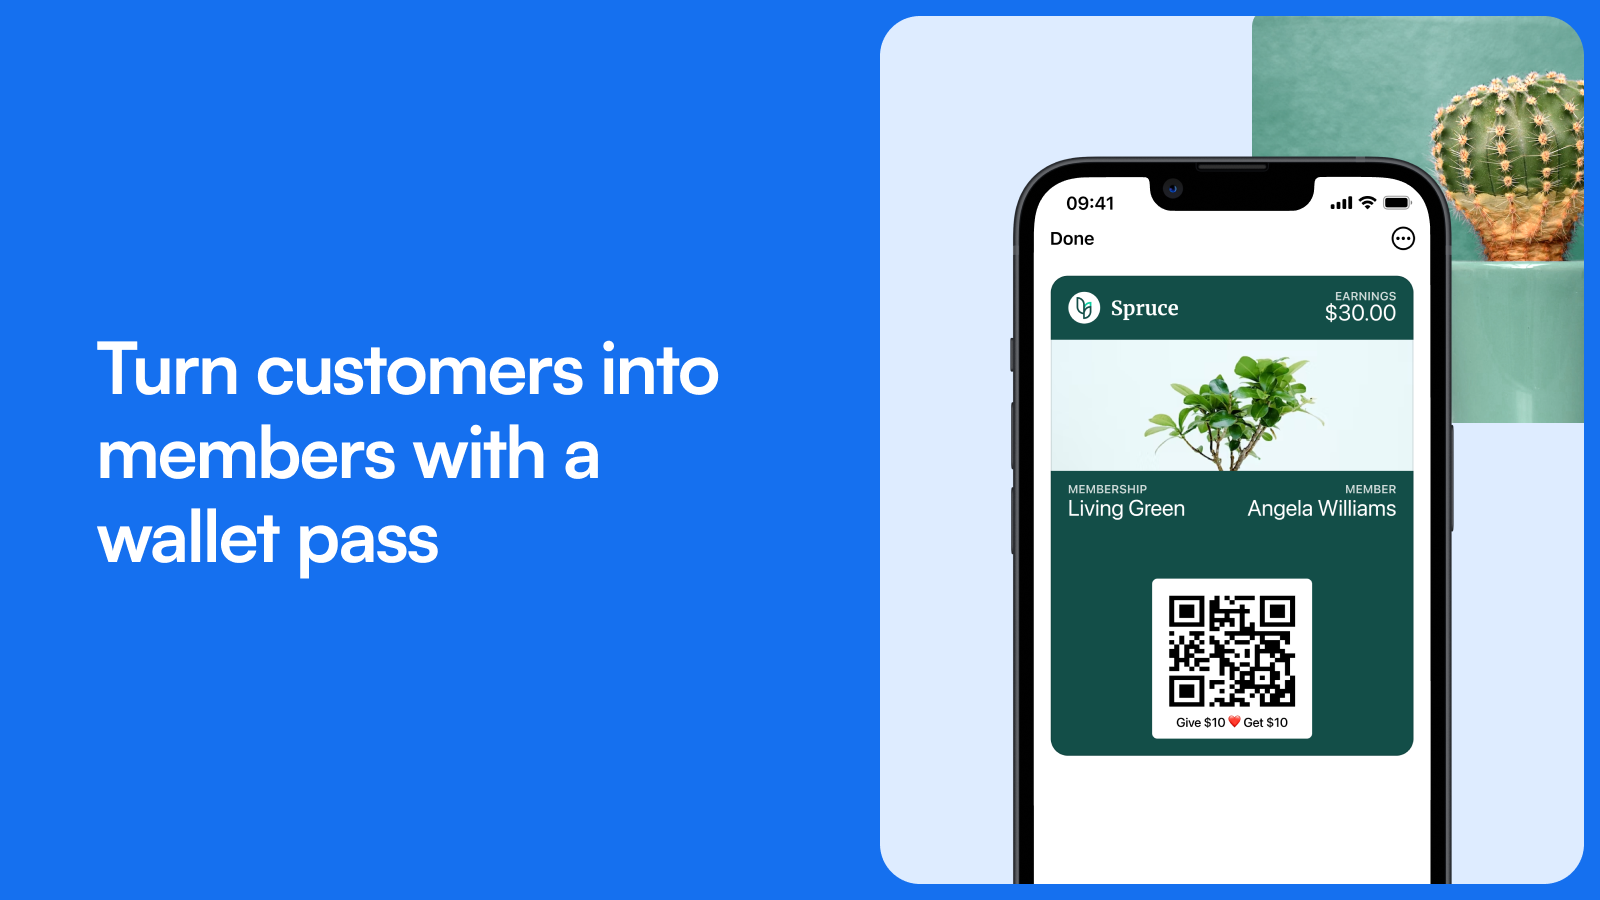 Turn customers into members with a wallet pass